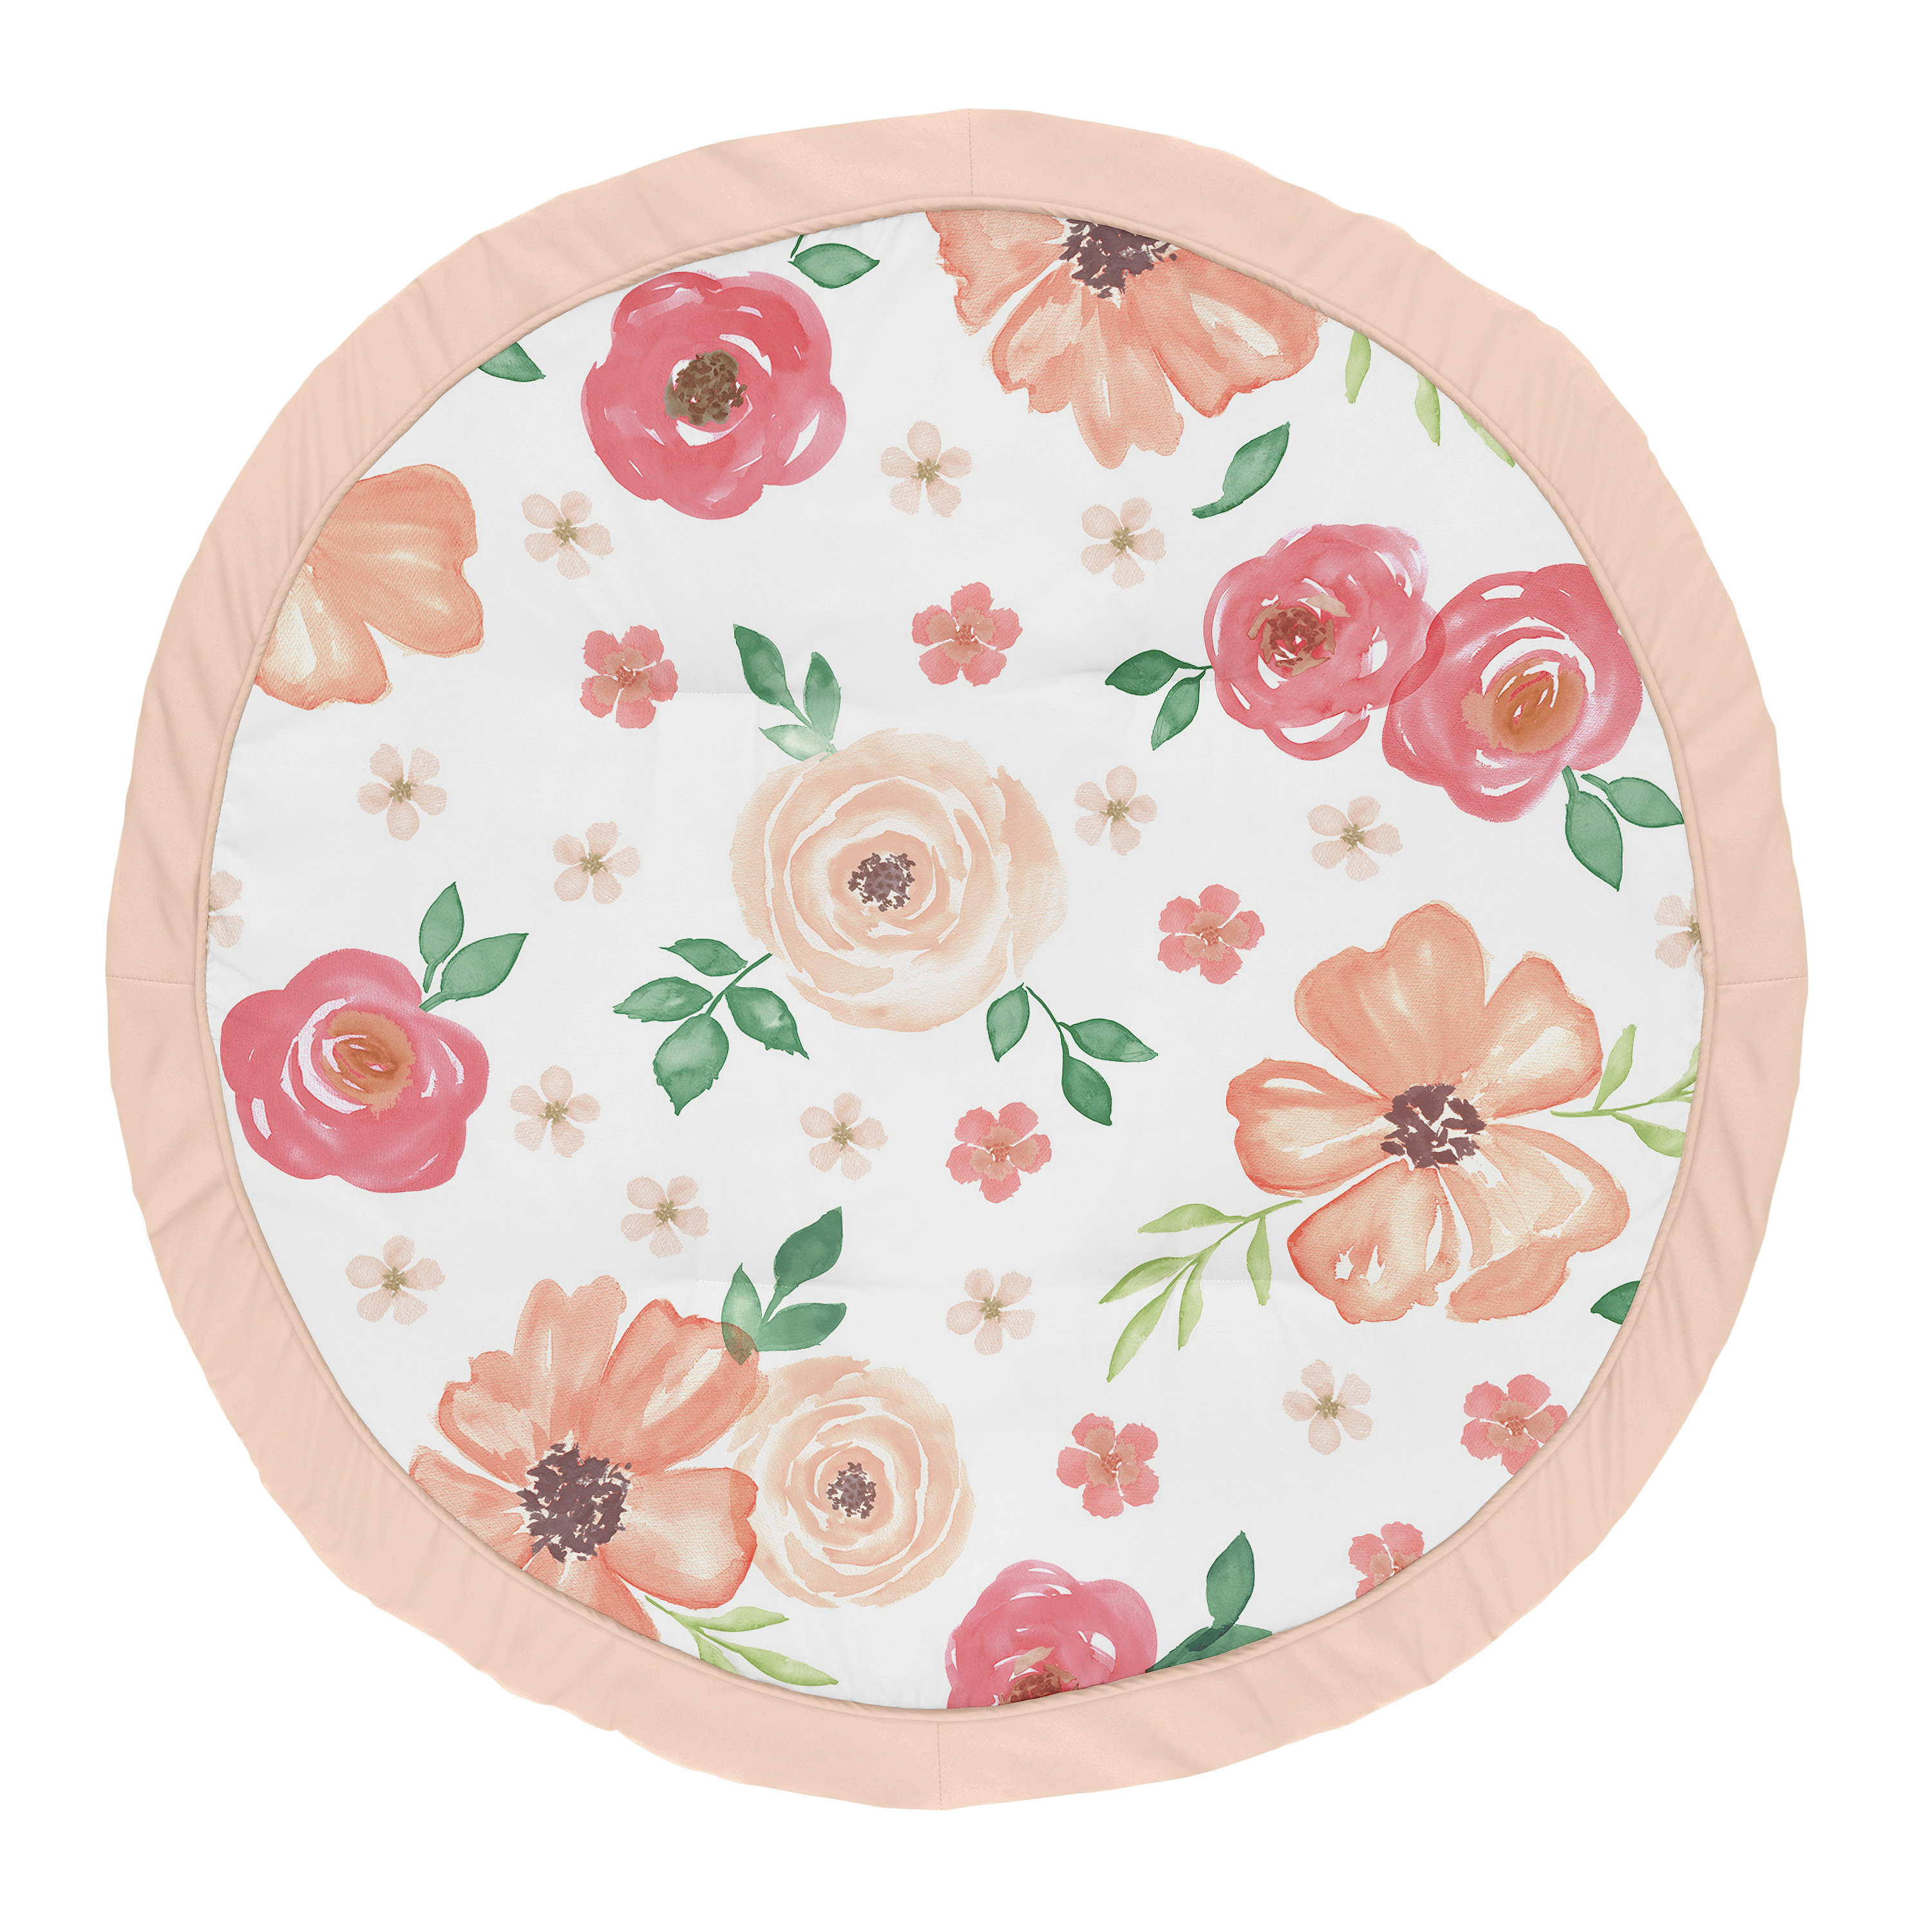 Wynter Floral Roses Round Playmat Baby Nursery Throw Rug Floral Baby Girl Baby Tummy Time Rug